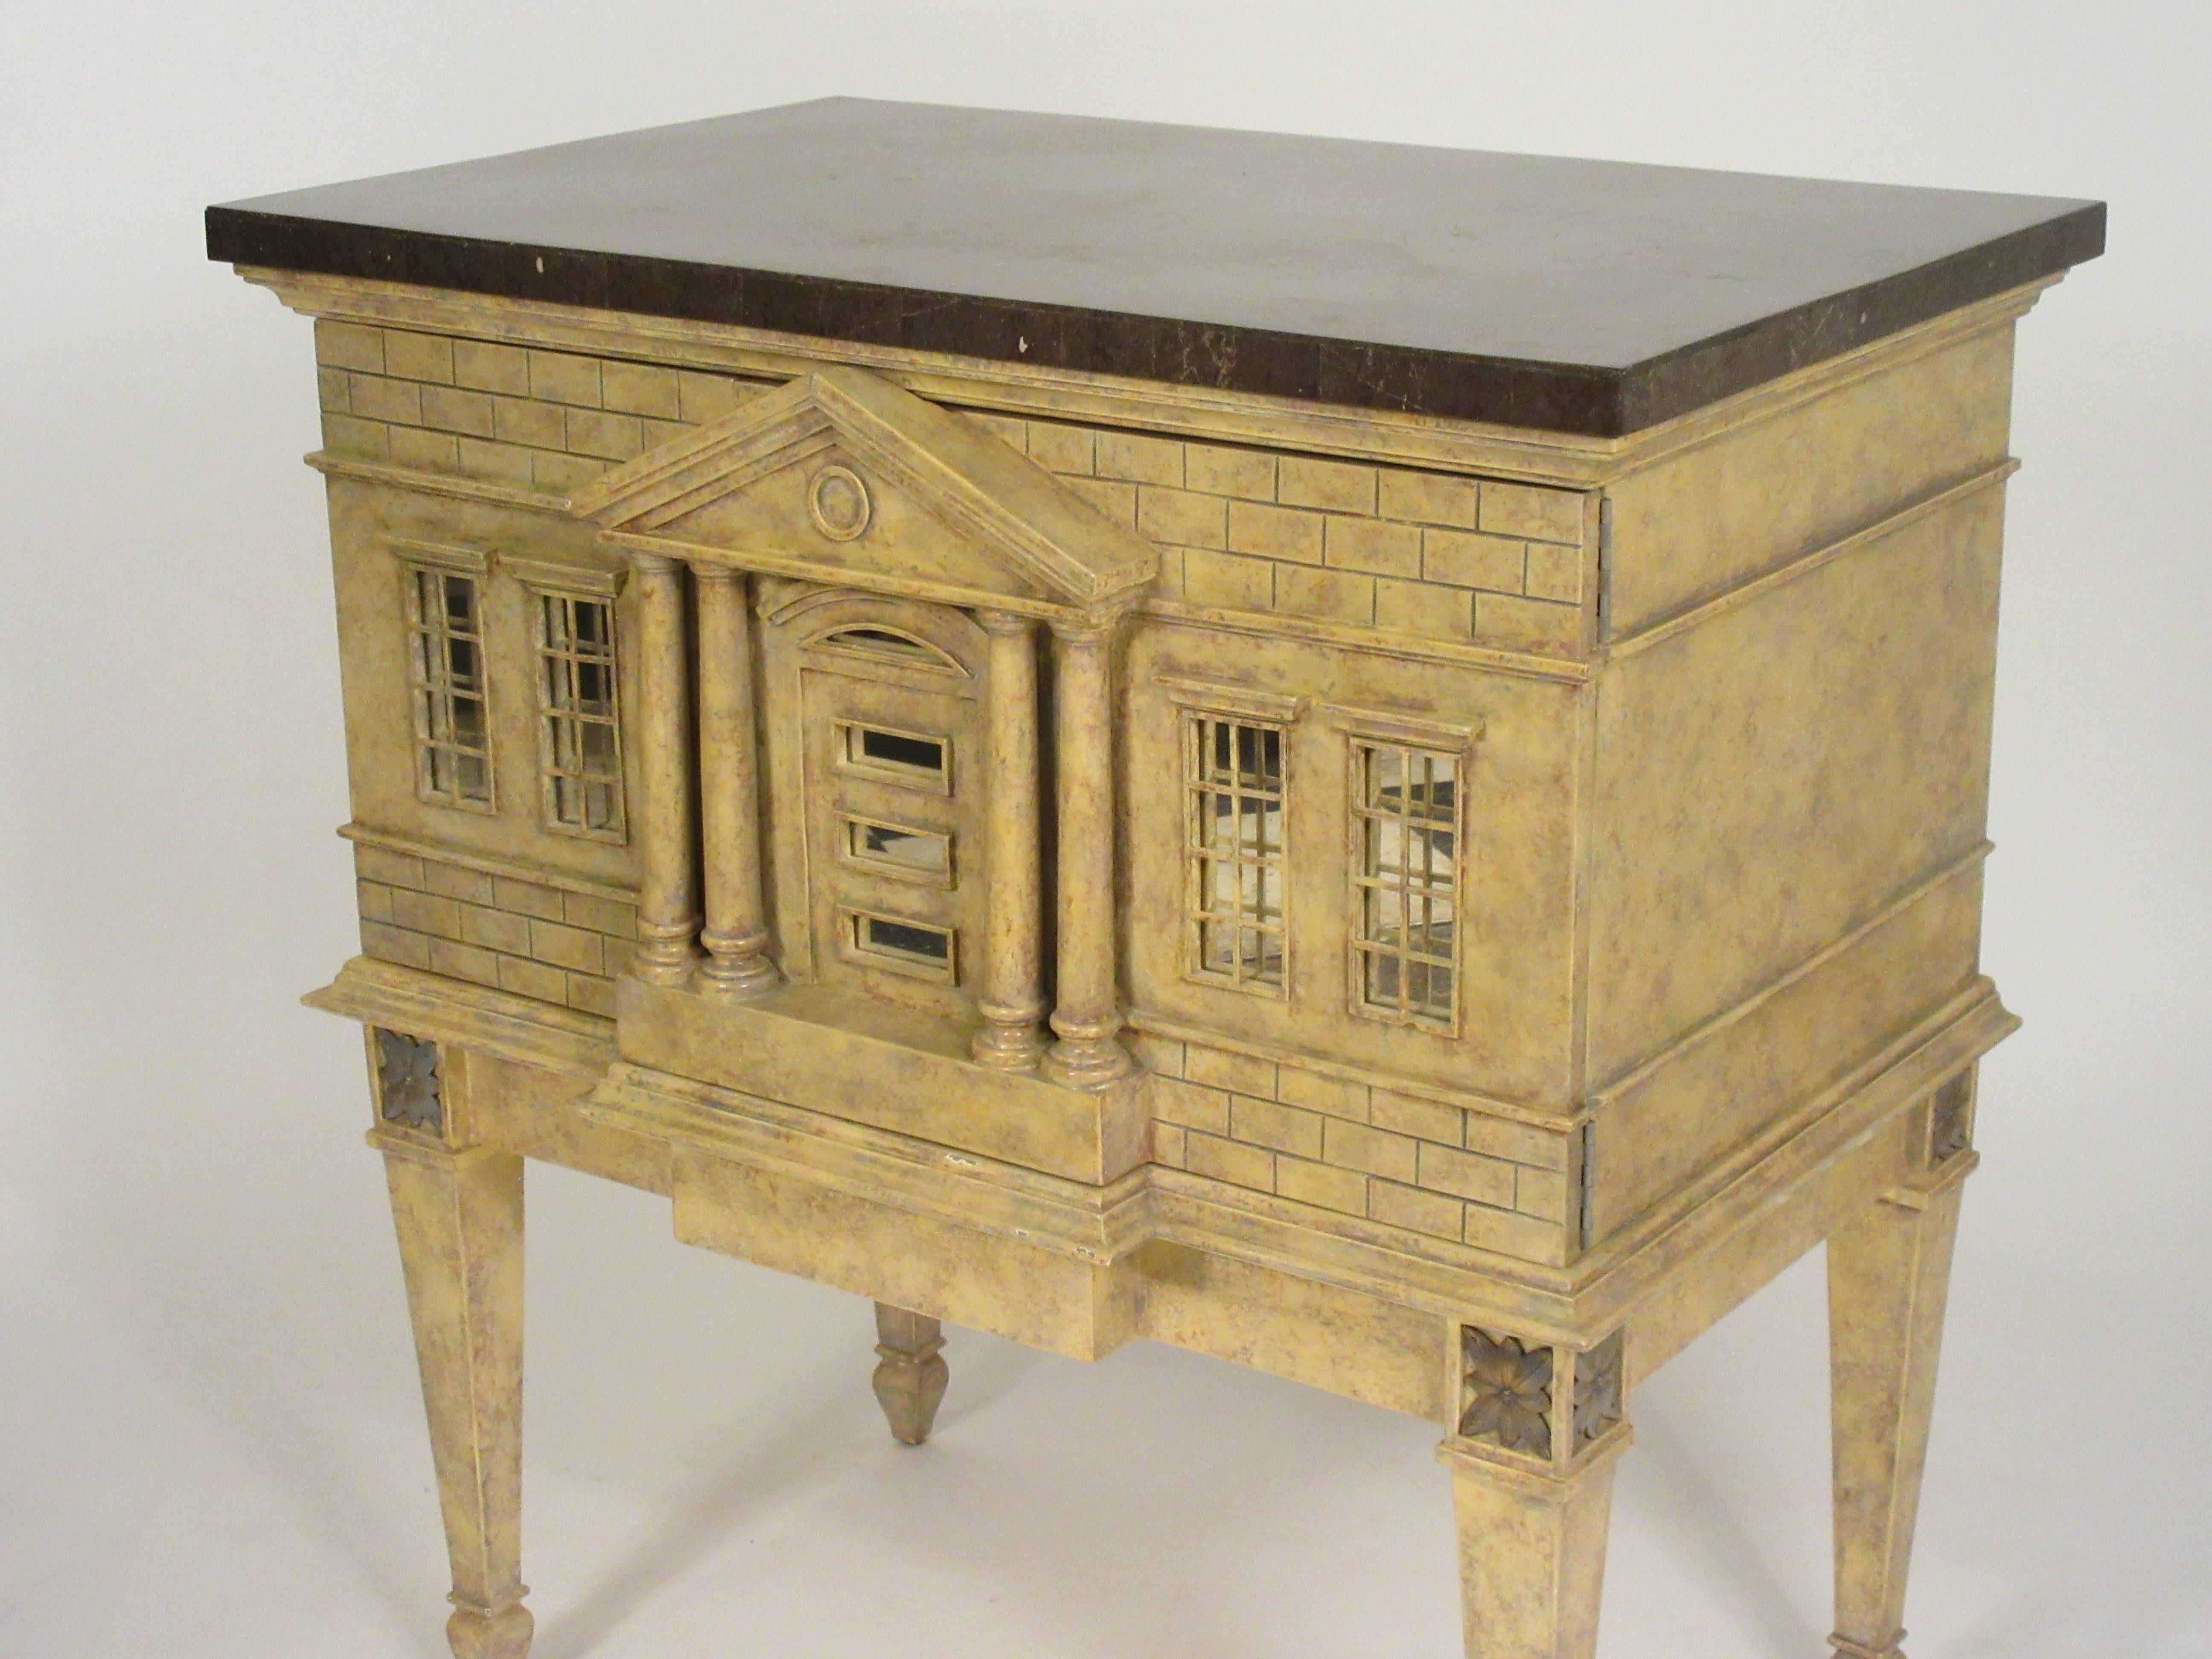 Unique chest, designed as a classical building stone top and brass accents.